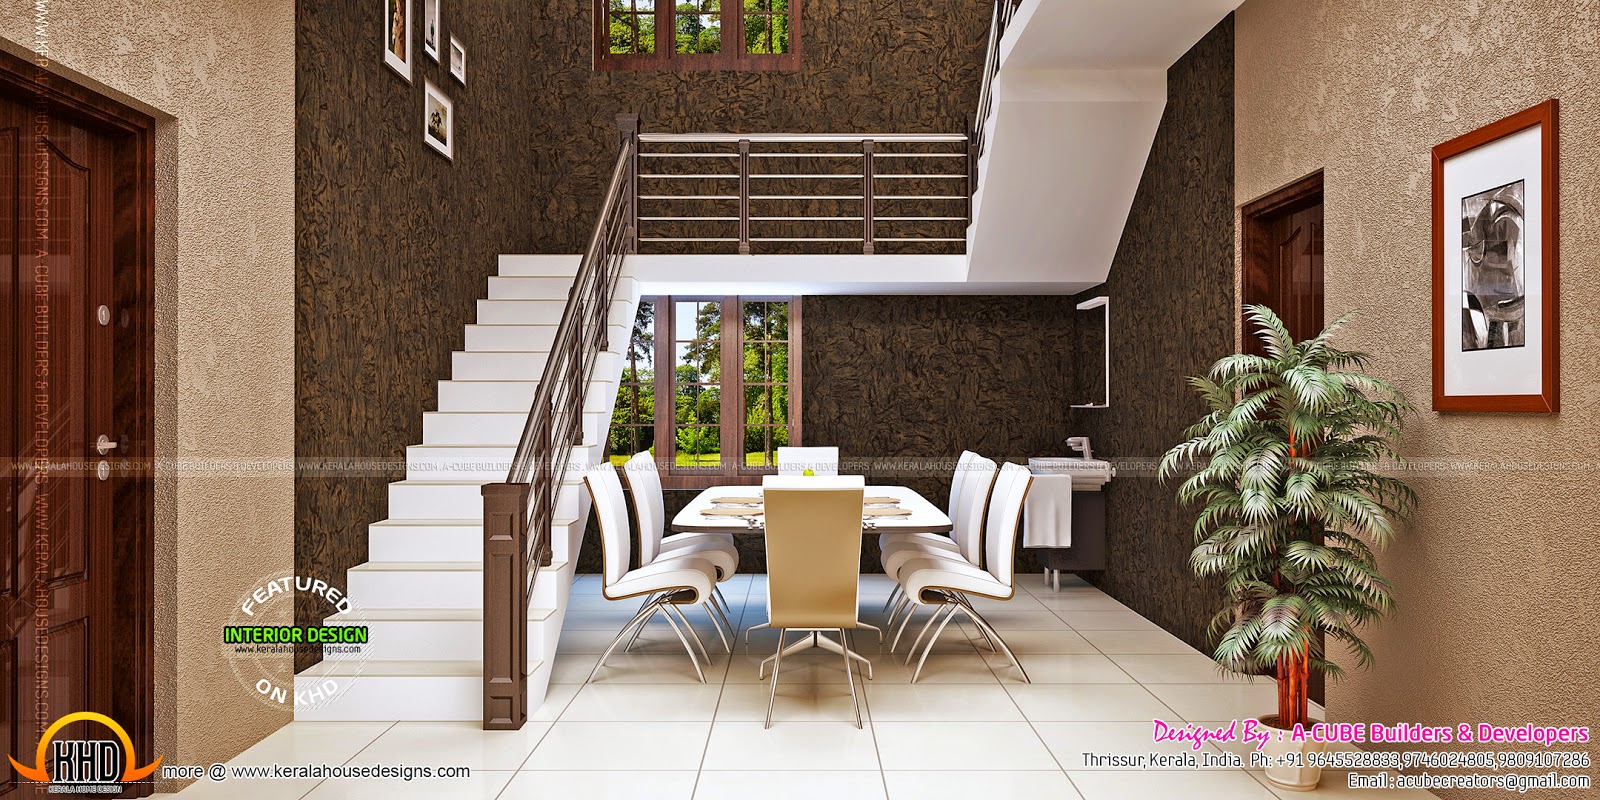 staircase dining kerala under indian interiors floor plans toned keralahousedesigns builders cube south